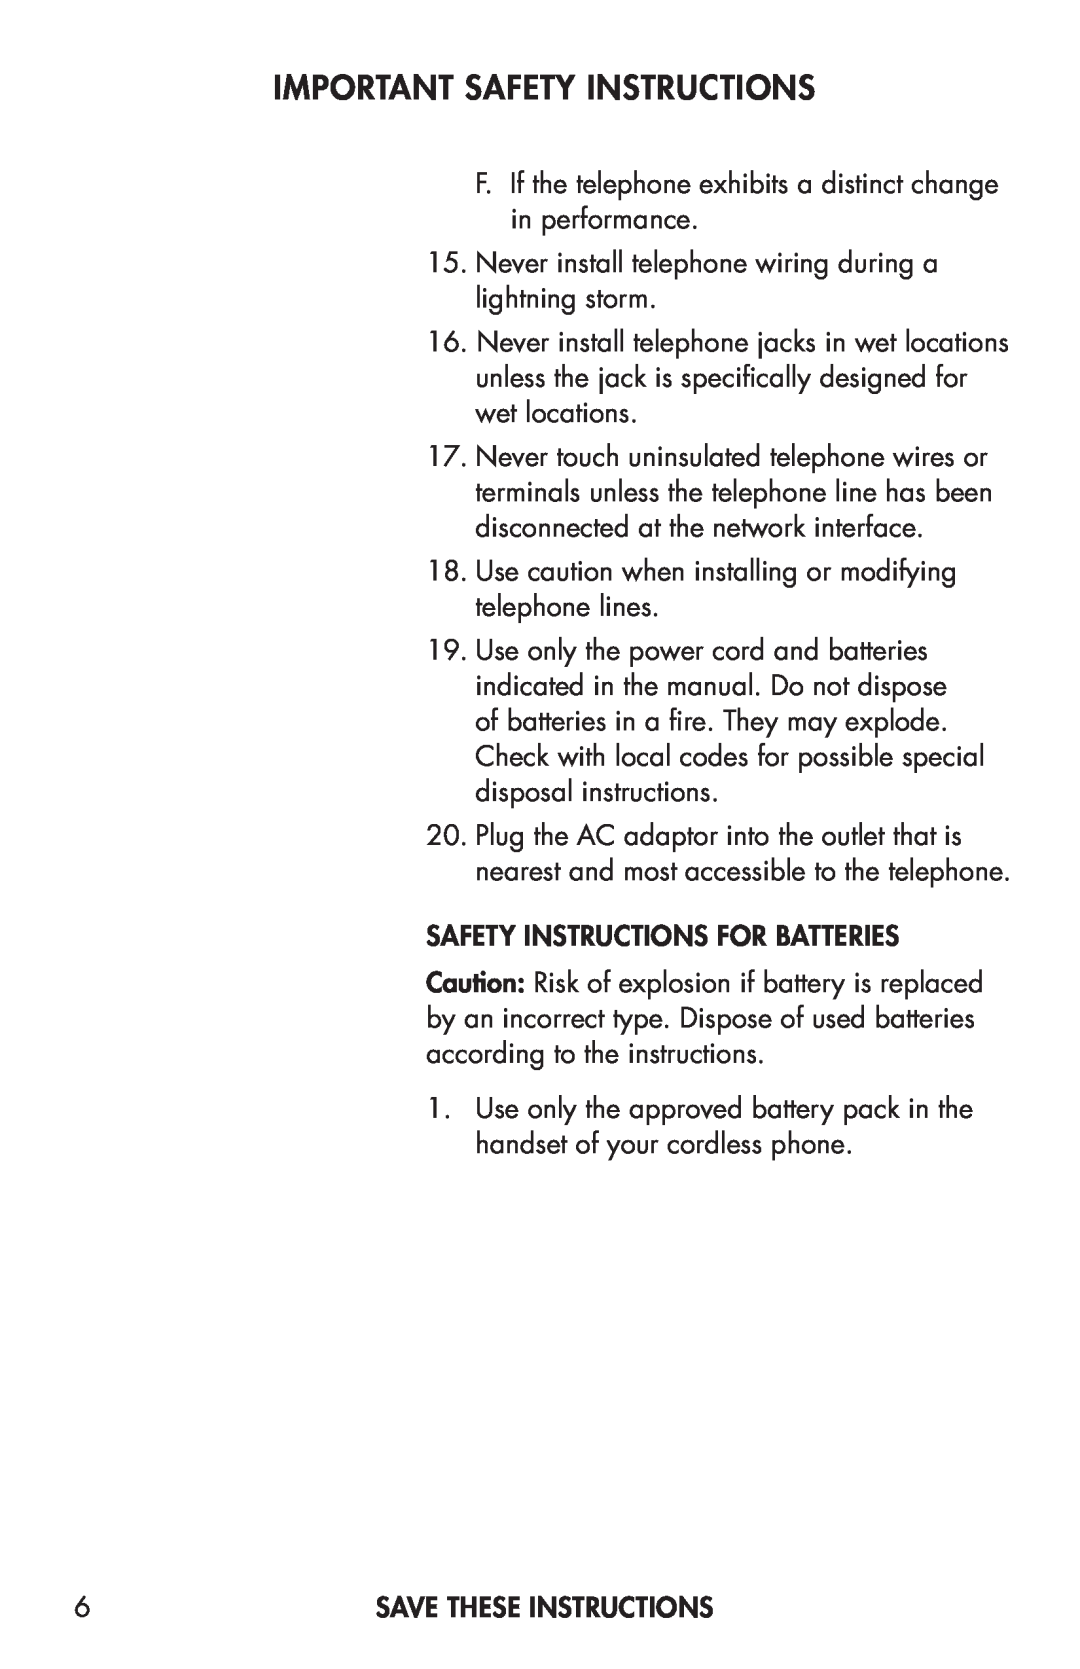 Clarity C4205 manual Important Safety Instructions, F. If the telephone exhibits a distinct change in performance 